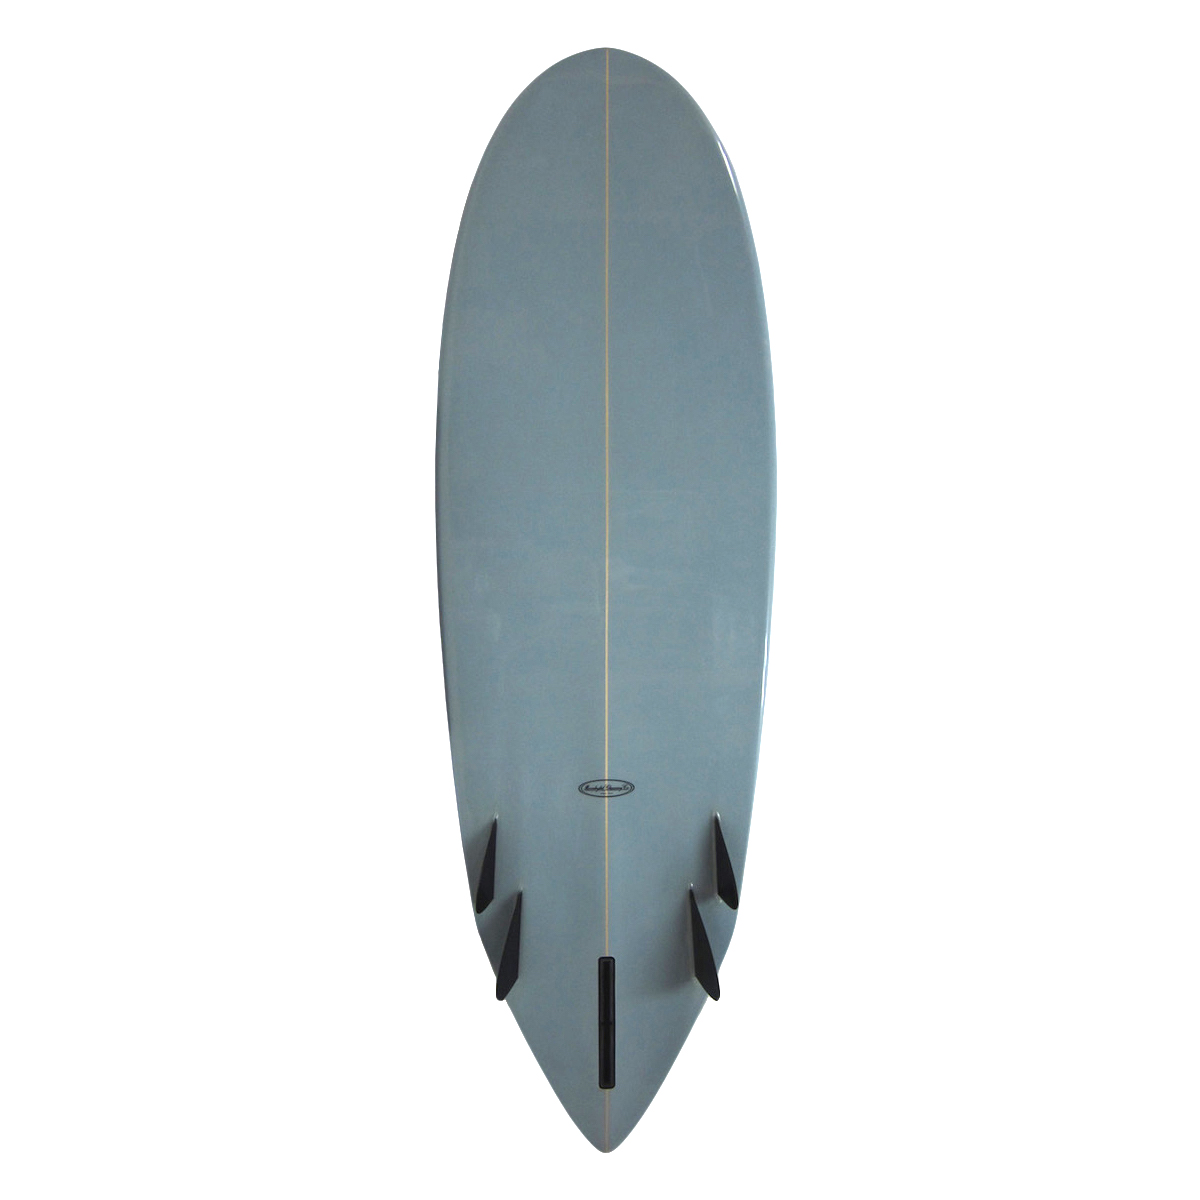 SURFY SURFY / THE THUMB 5`9 Shaped by Campbell bros